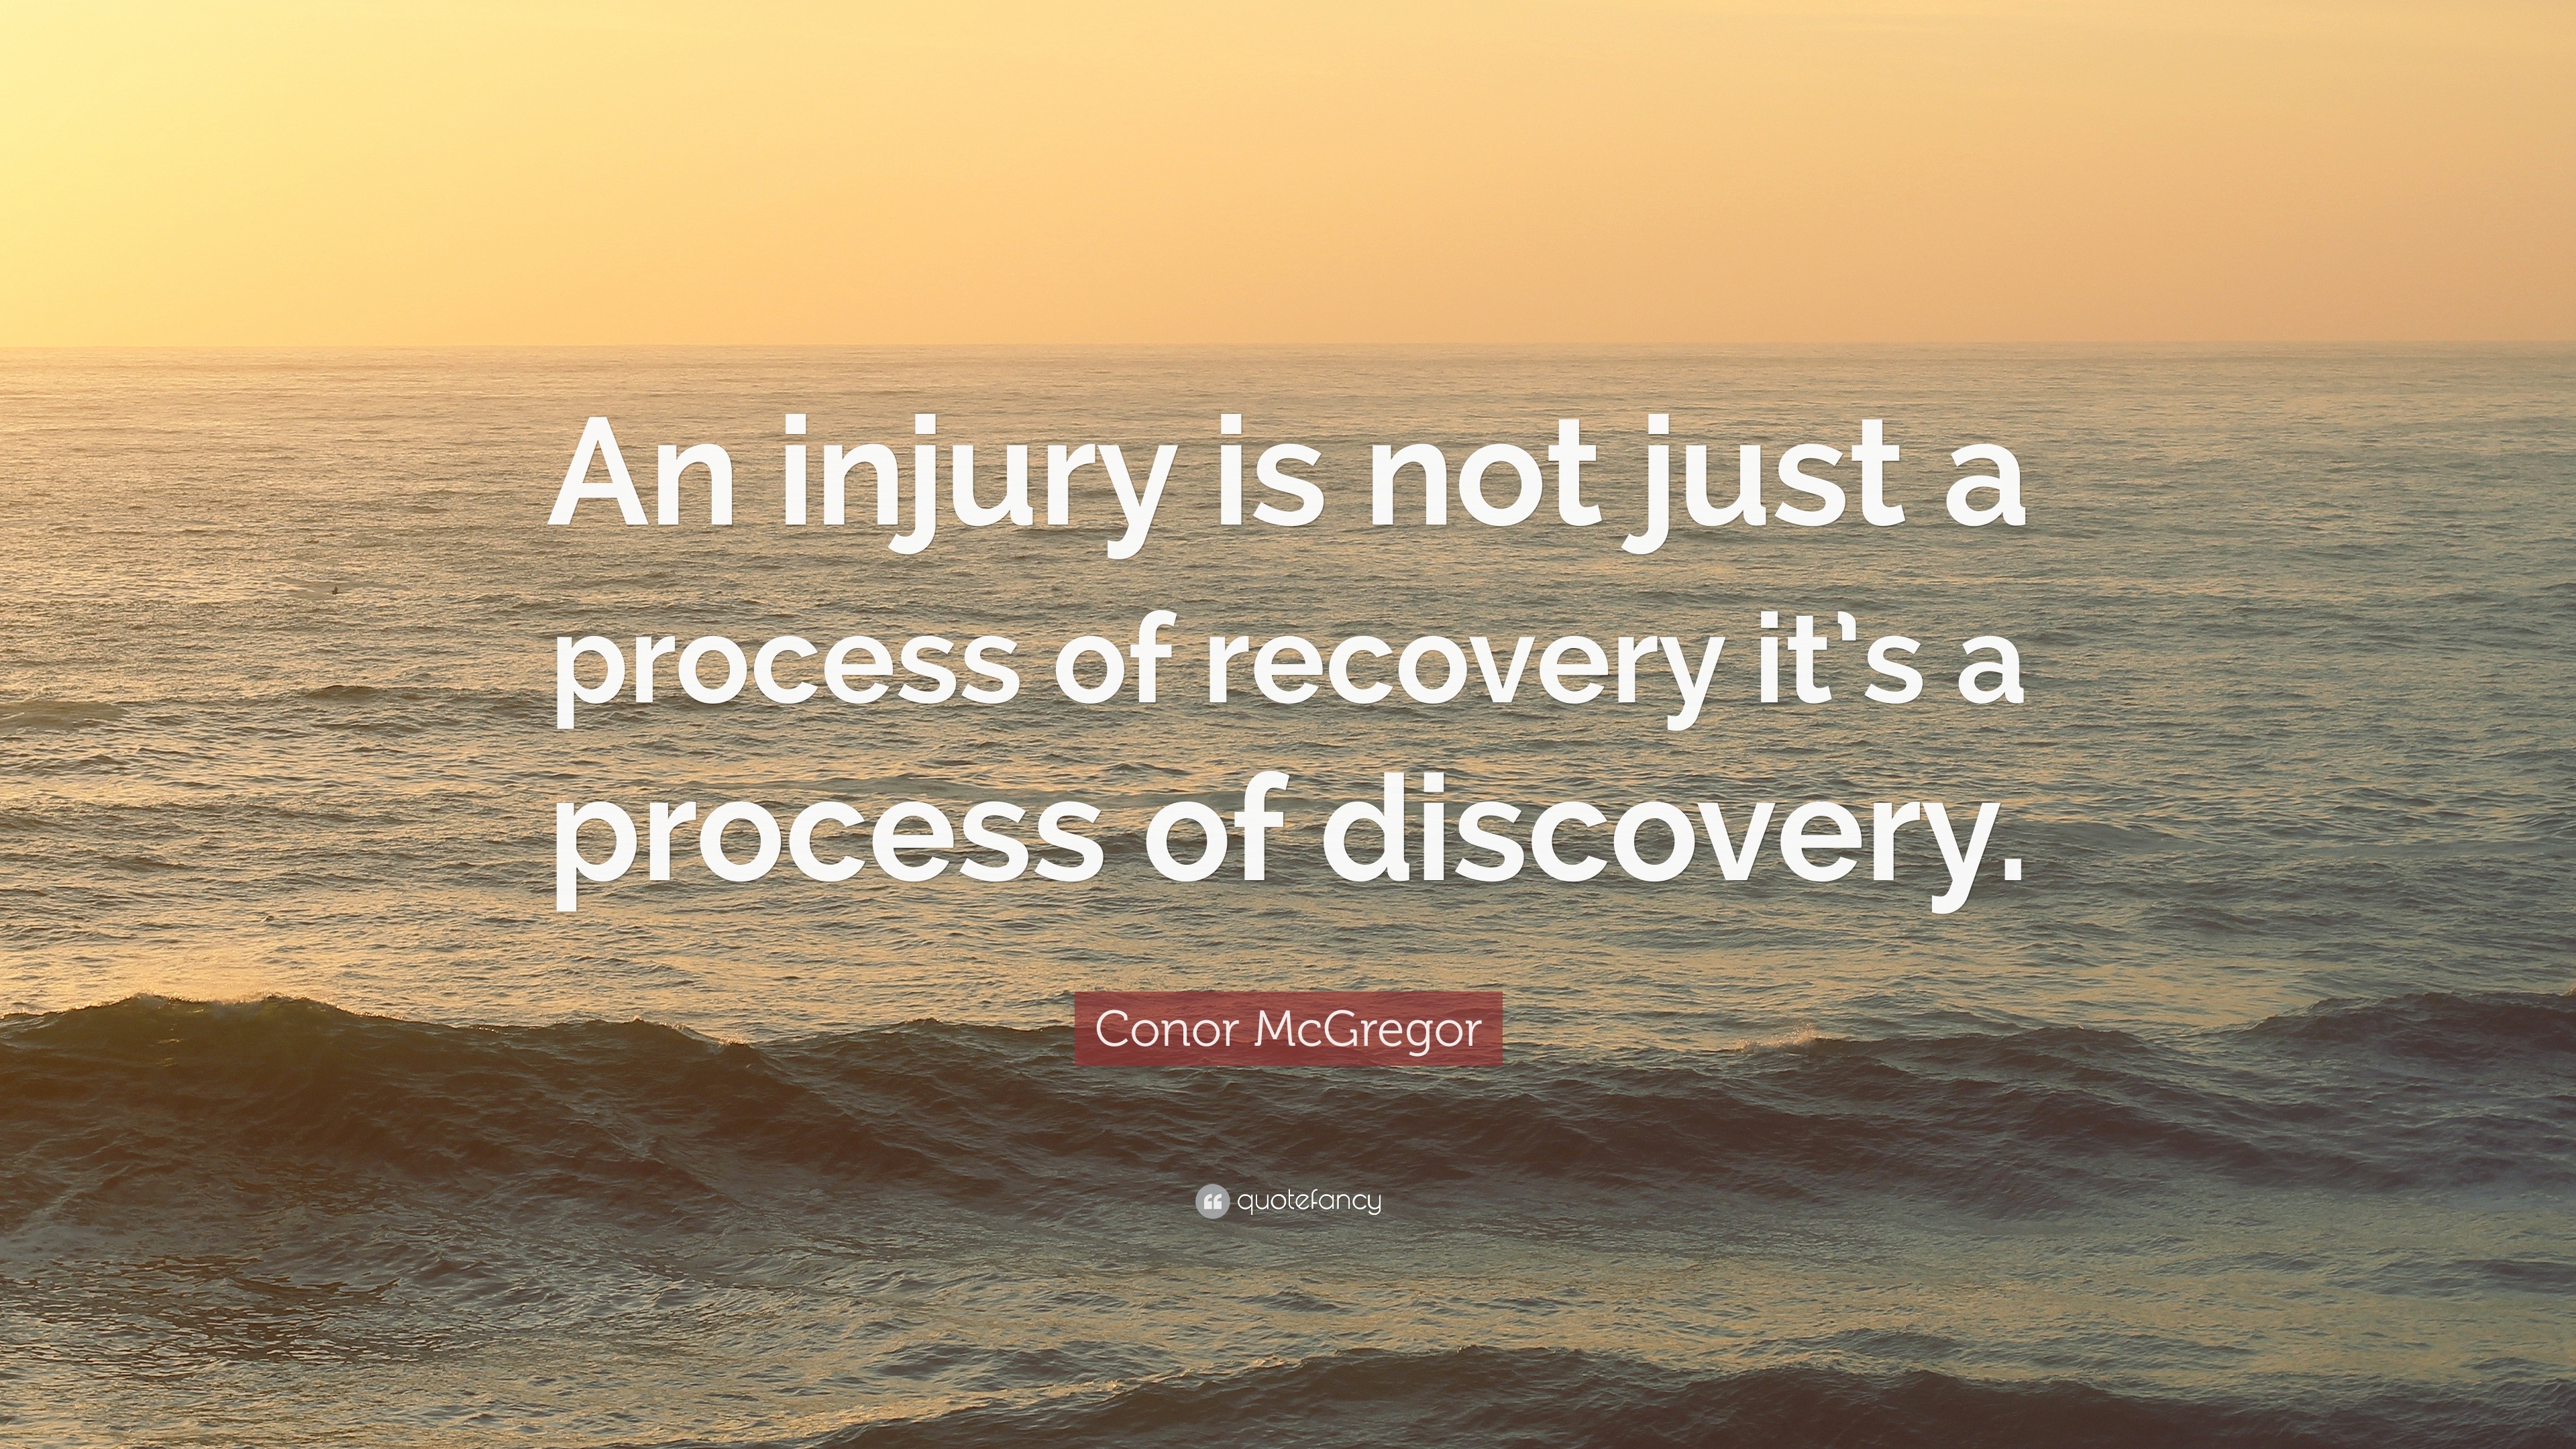 Conor McGregor Quote: “An injury is not just a process of recovery it’s